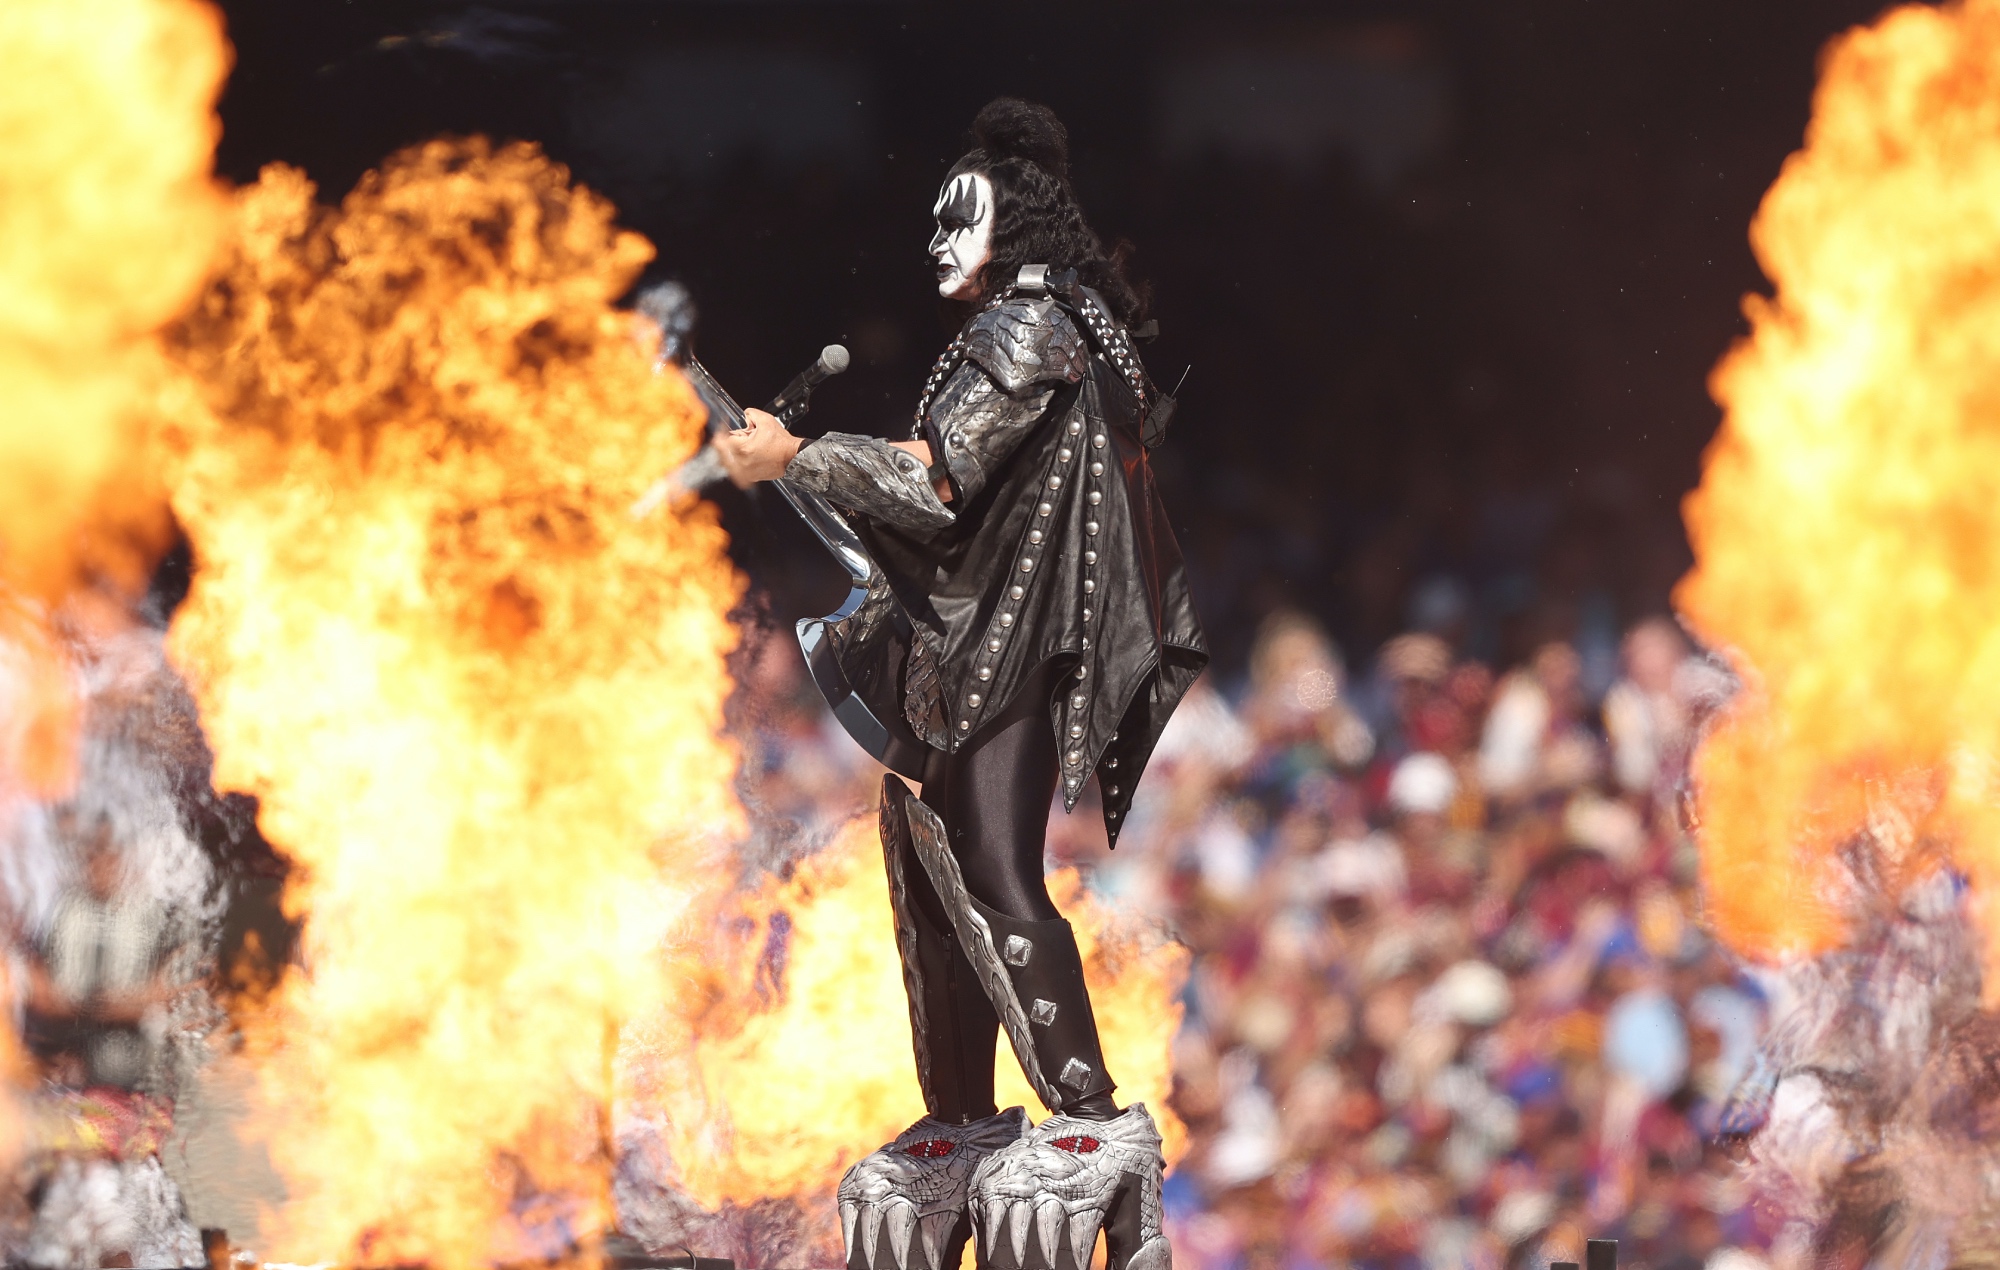 Gene Simmons says KISS’ farewell tour is “end of the road for the band, not the brand”